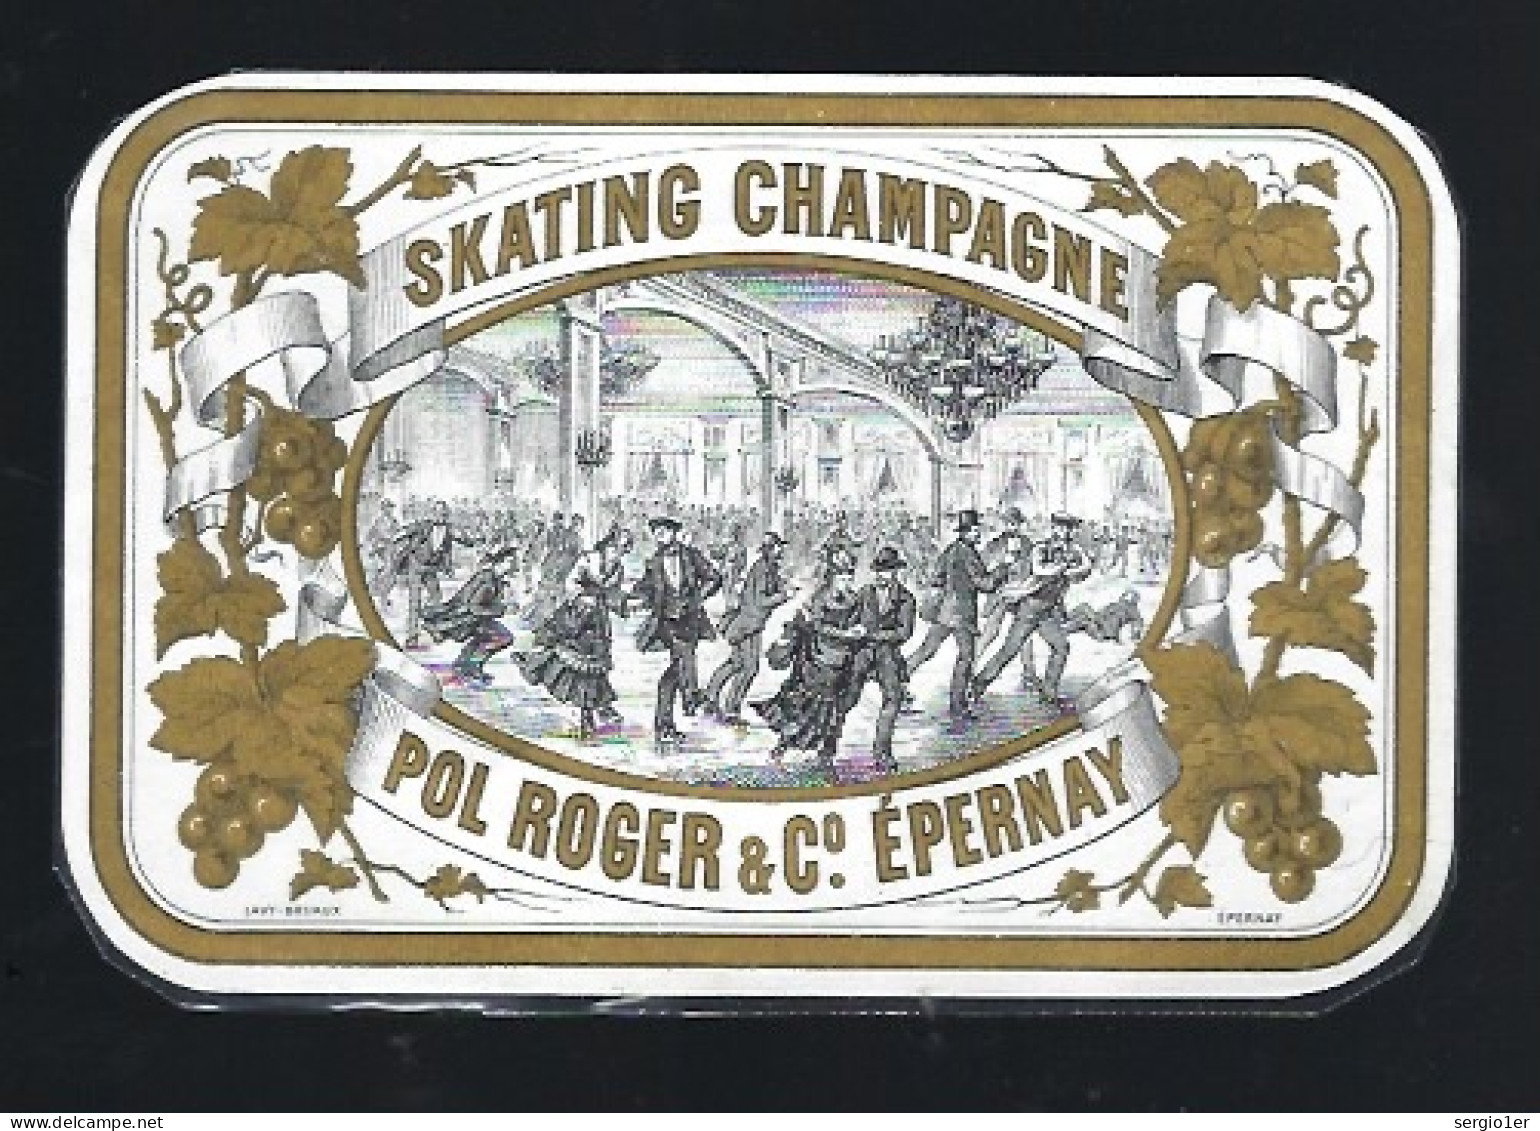 Etiquette Champagne   Skating Champagne  Pol Roger & Cie Epernay  Marne 51  Ancienne  Début Du Siècle " Patinage" - Champagner